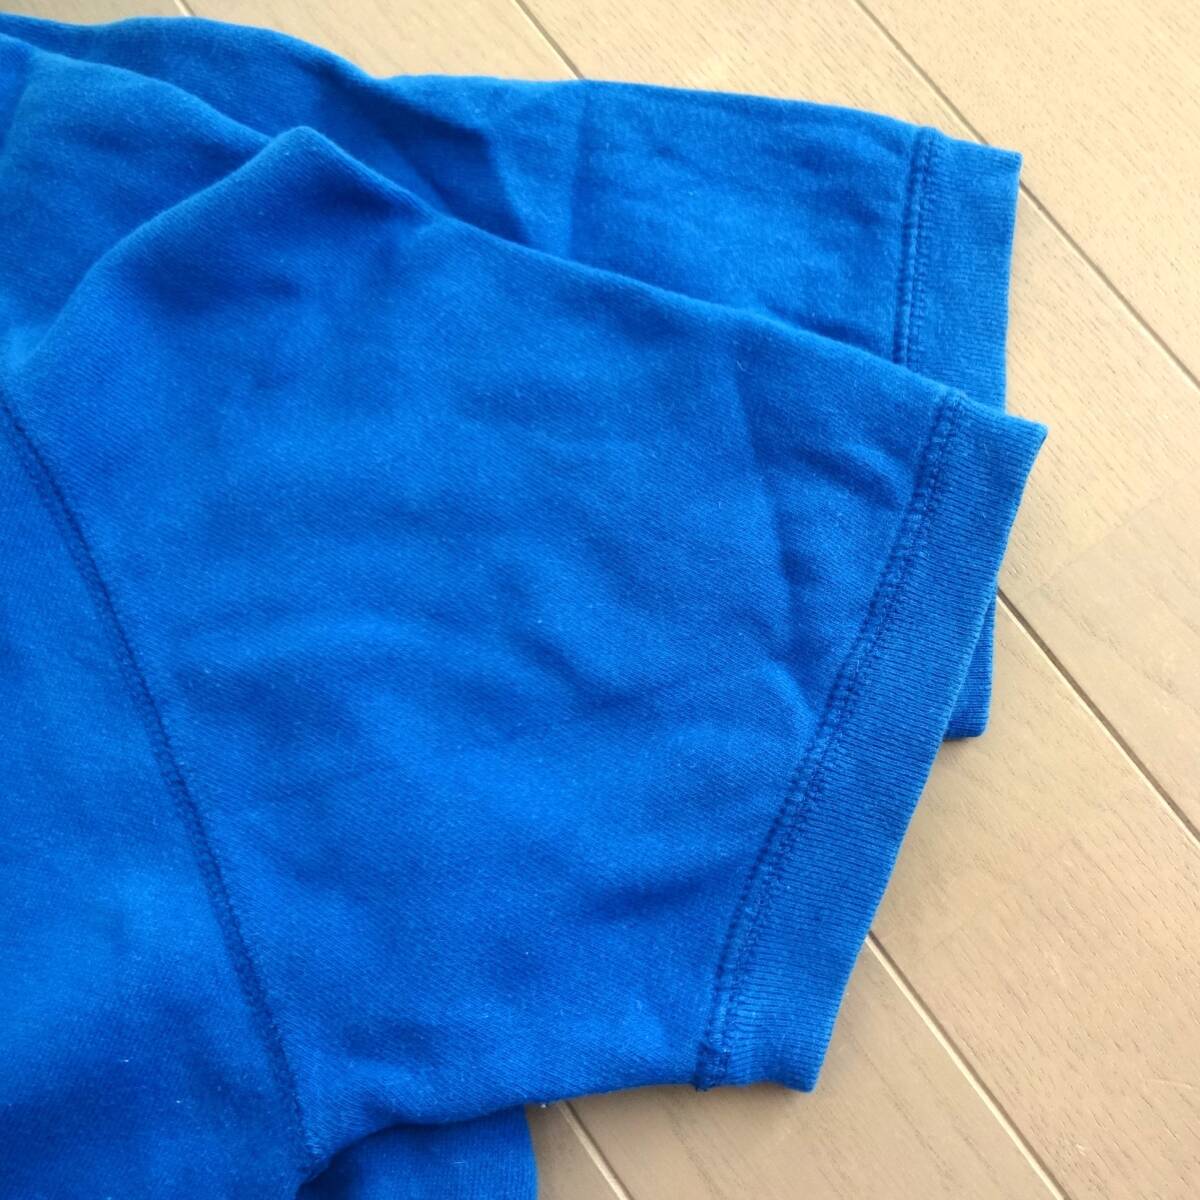  Vintage reissue replica BURDEN SPORTSWEAR short sleeves sweat sweatshirt blue #US AIR FORCE Air Force the US armed forces # American Casual old clothes la gran military USED